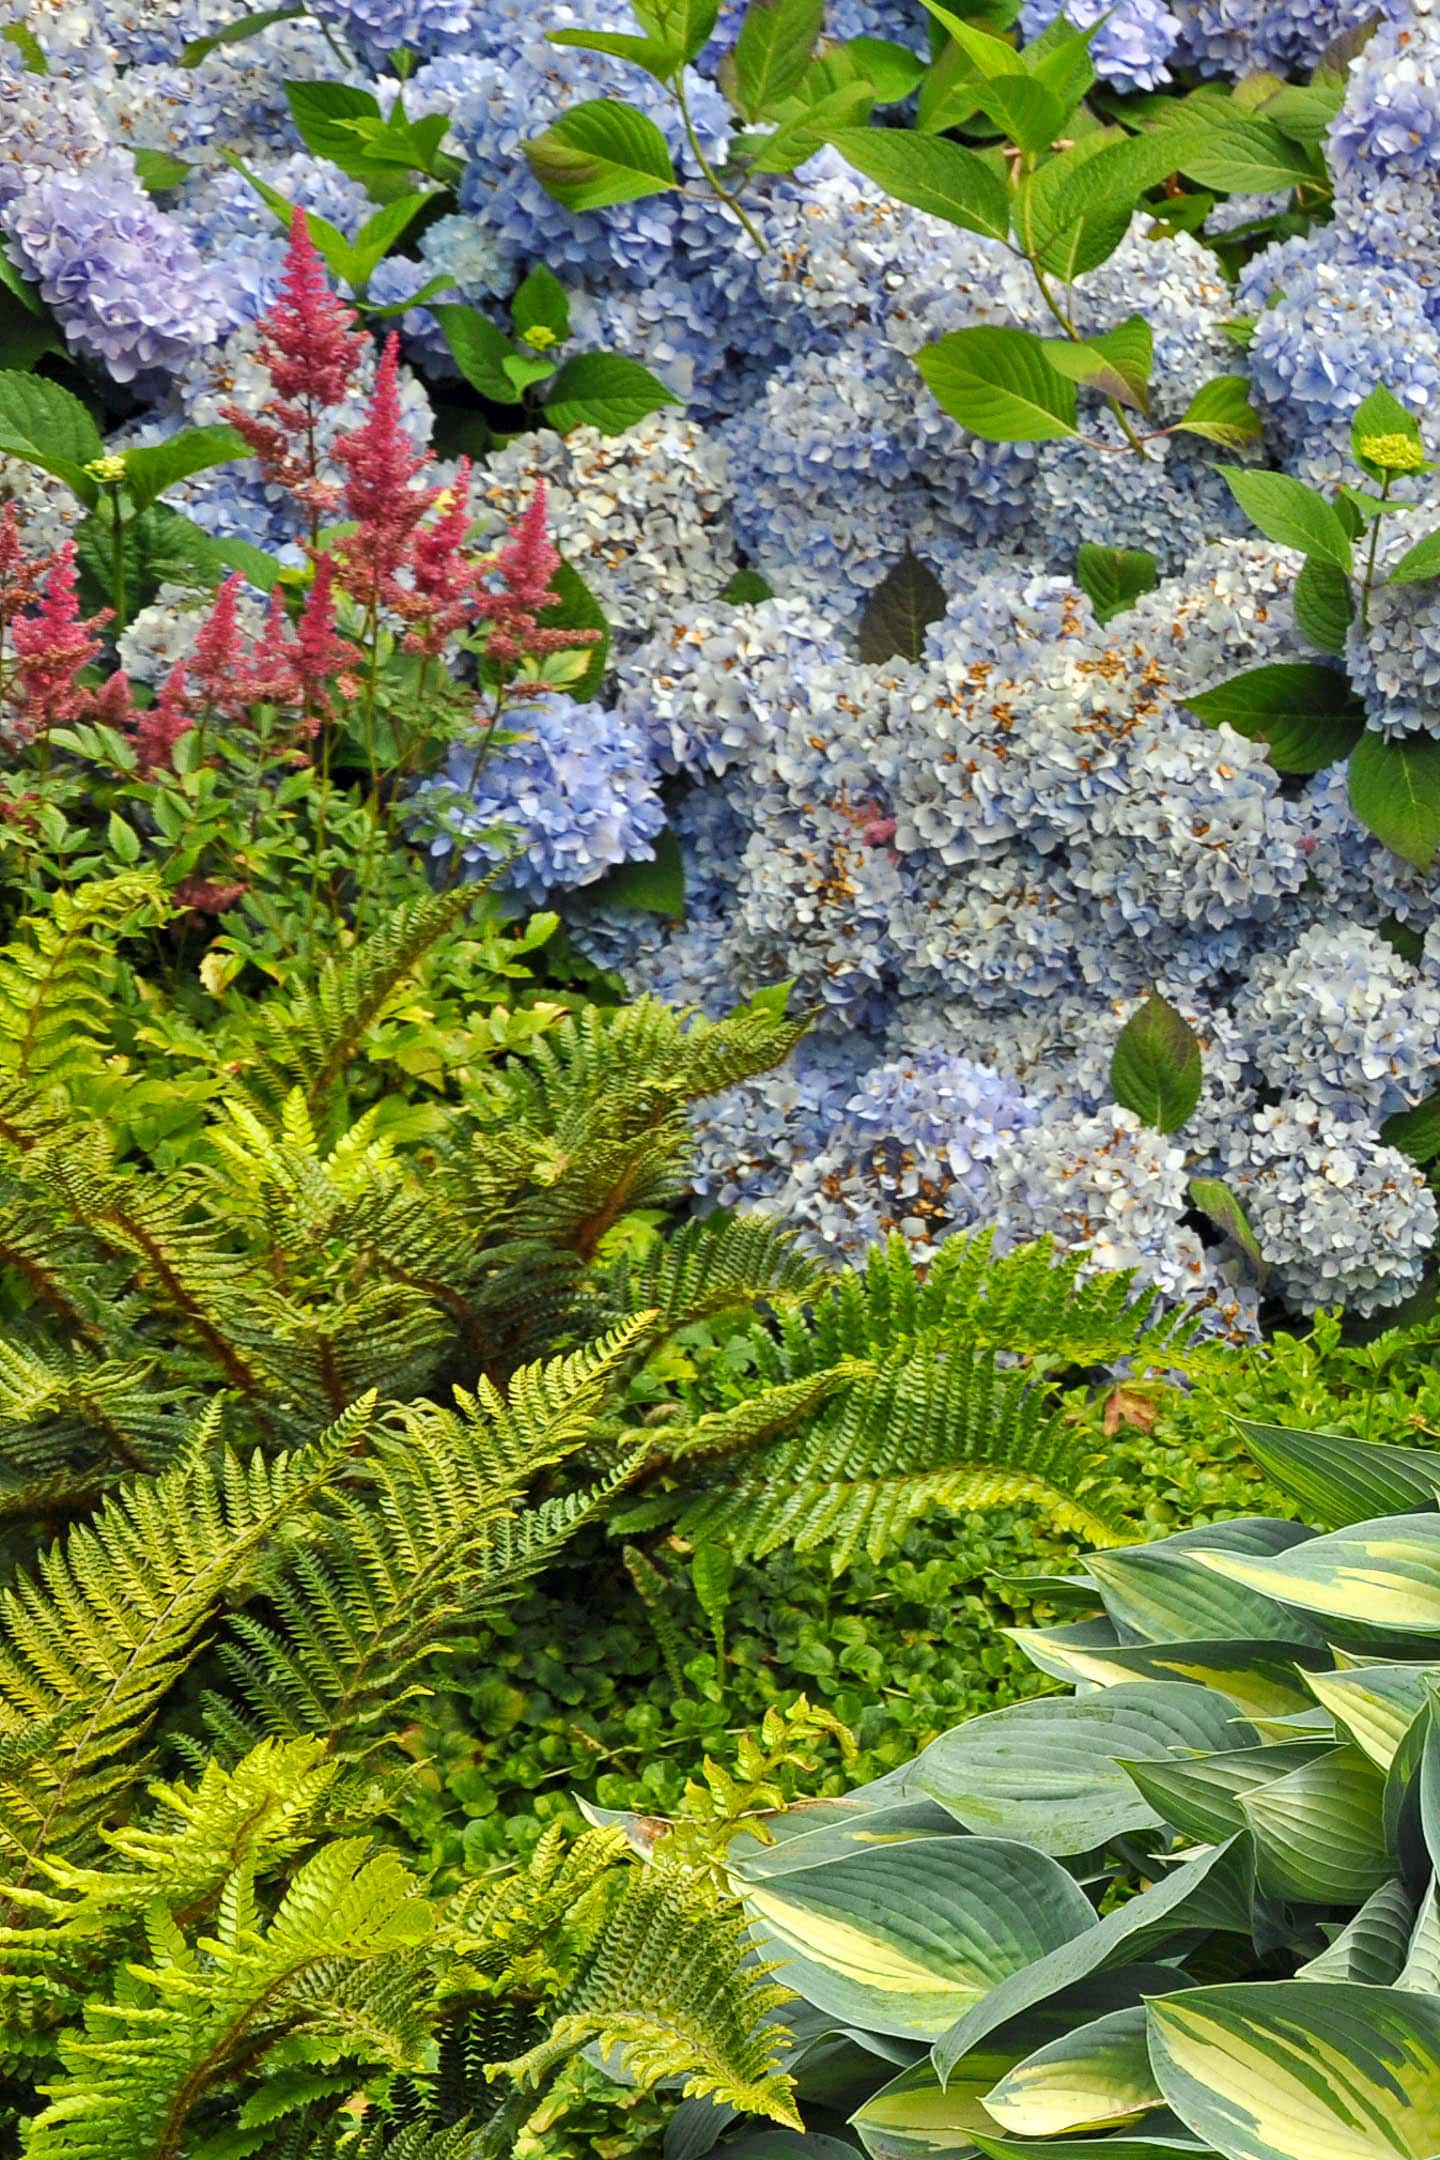 Large blue Hydrangeas planted with ferns and pink Astilbe